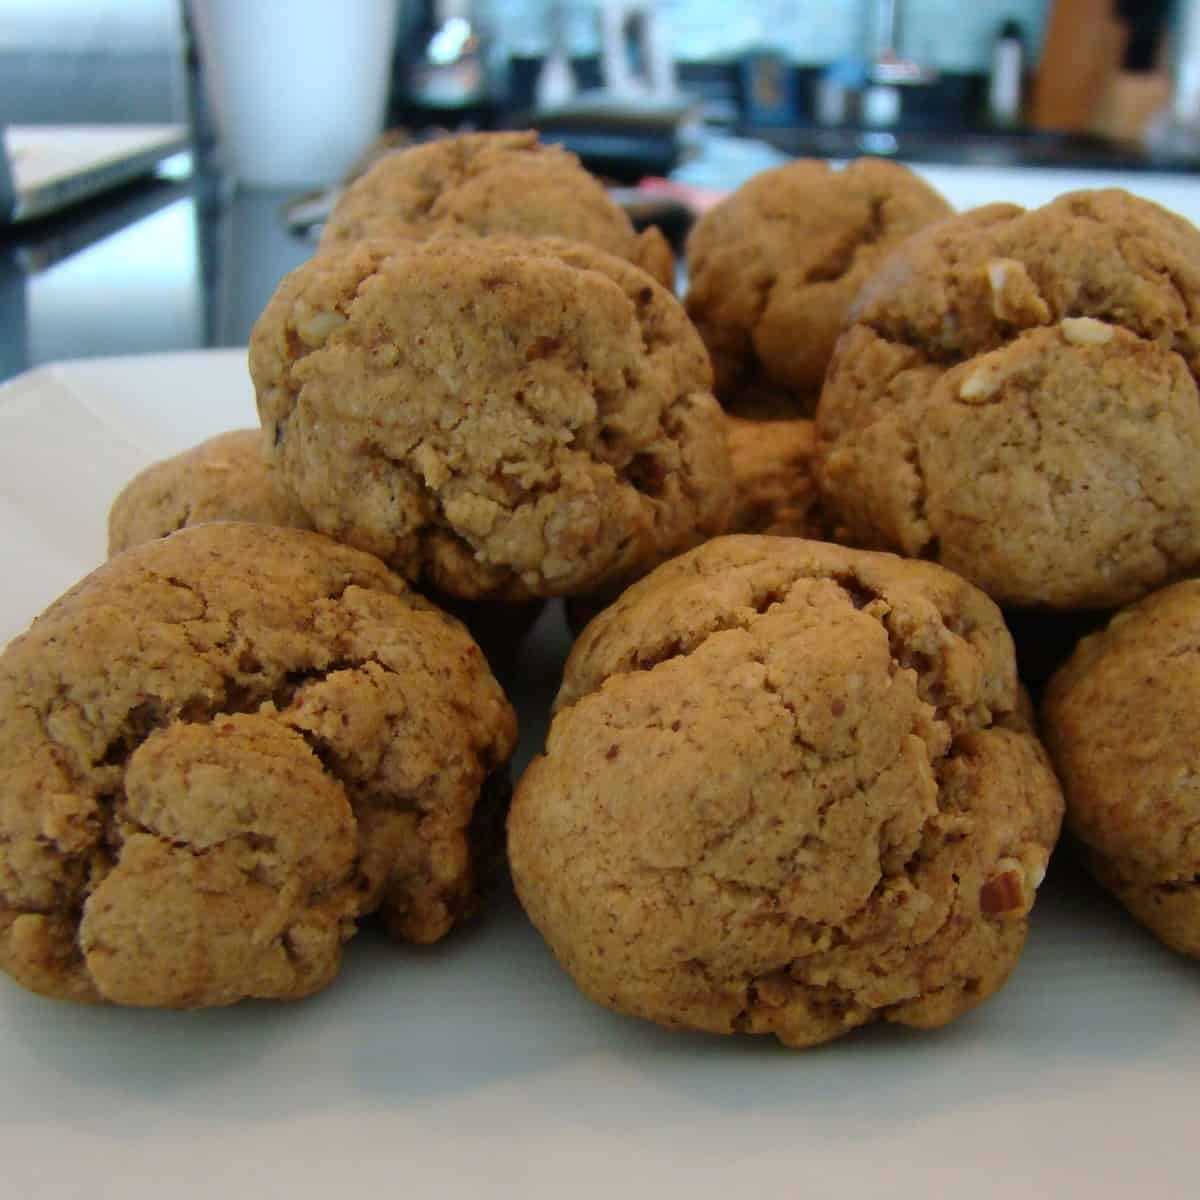  Indulge in a sweet treat with these vegan almond butter cookies!